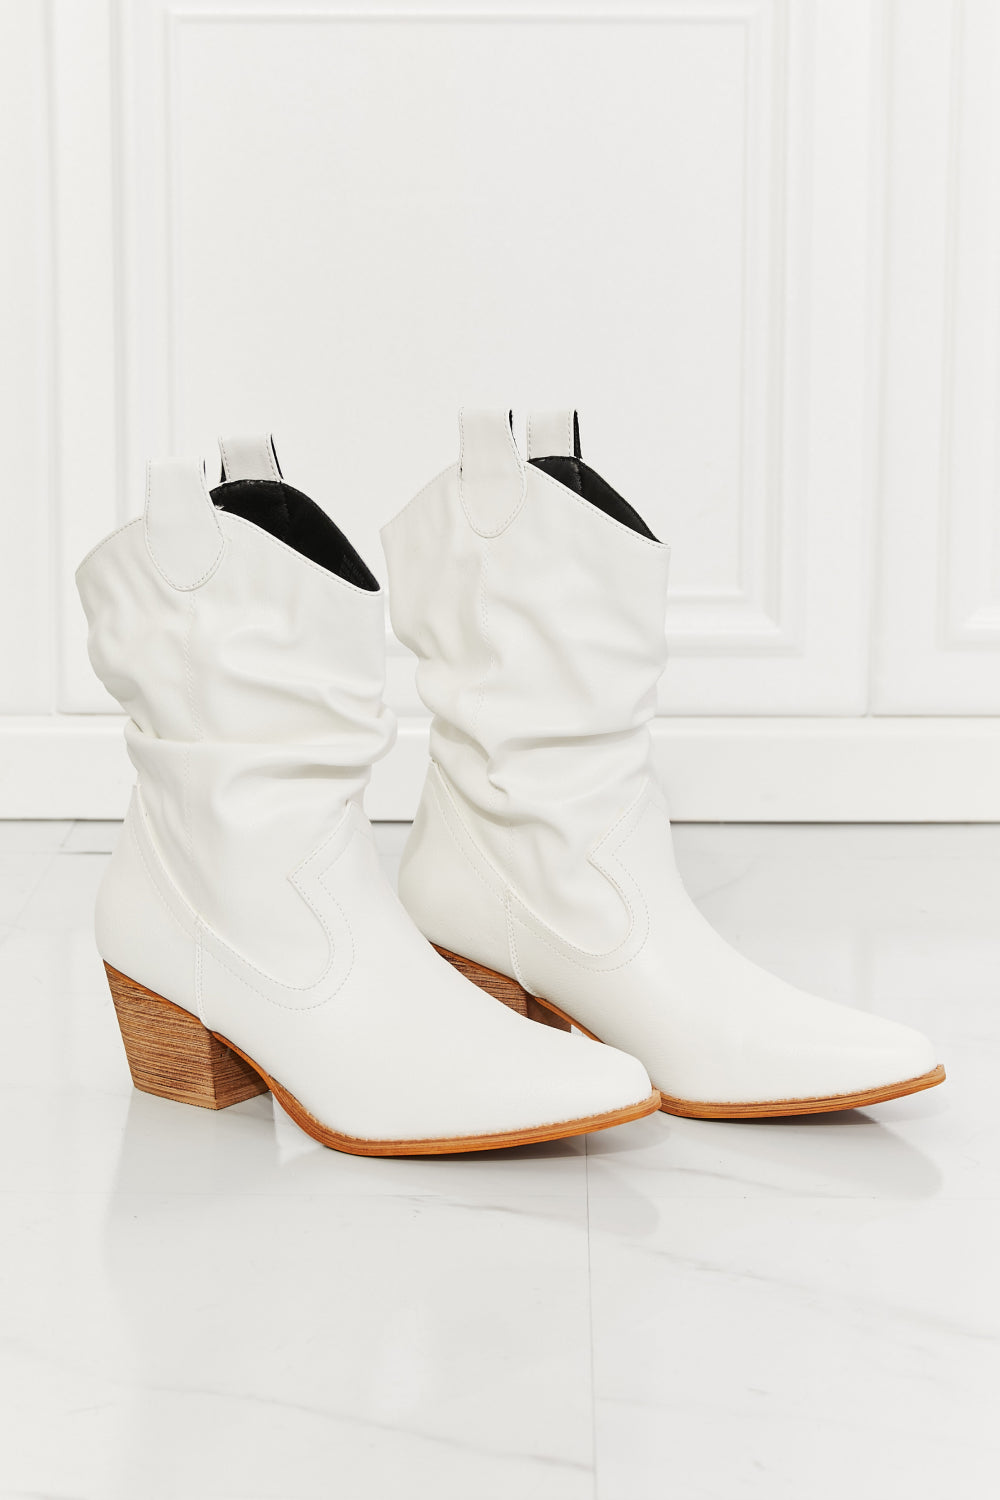 MMShoes Better in Texas Scrunch Cowboy Boots in White Print on any thing USA/STOD clothes